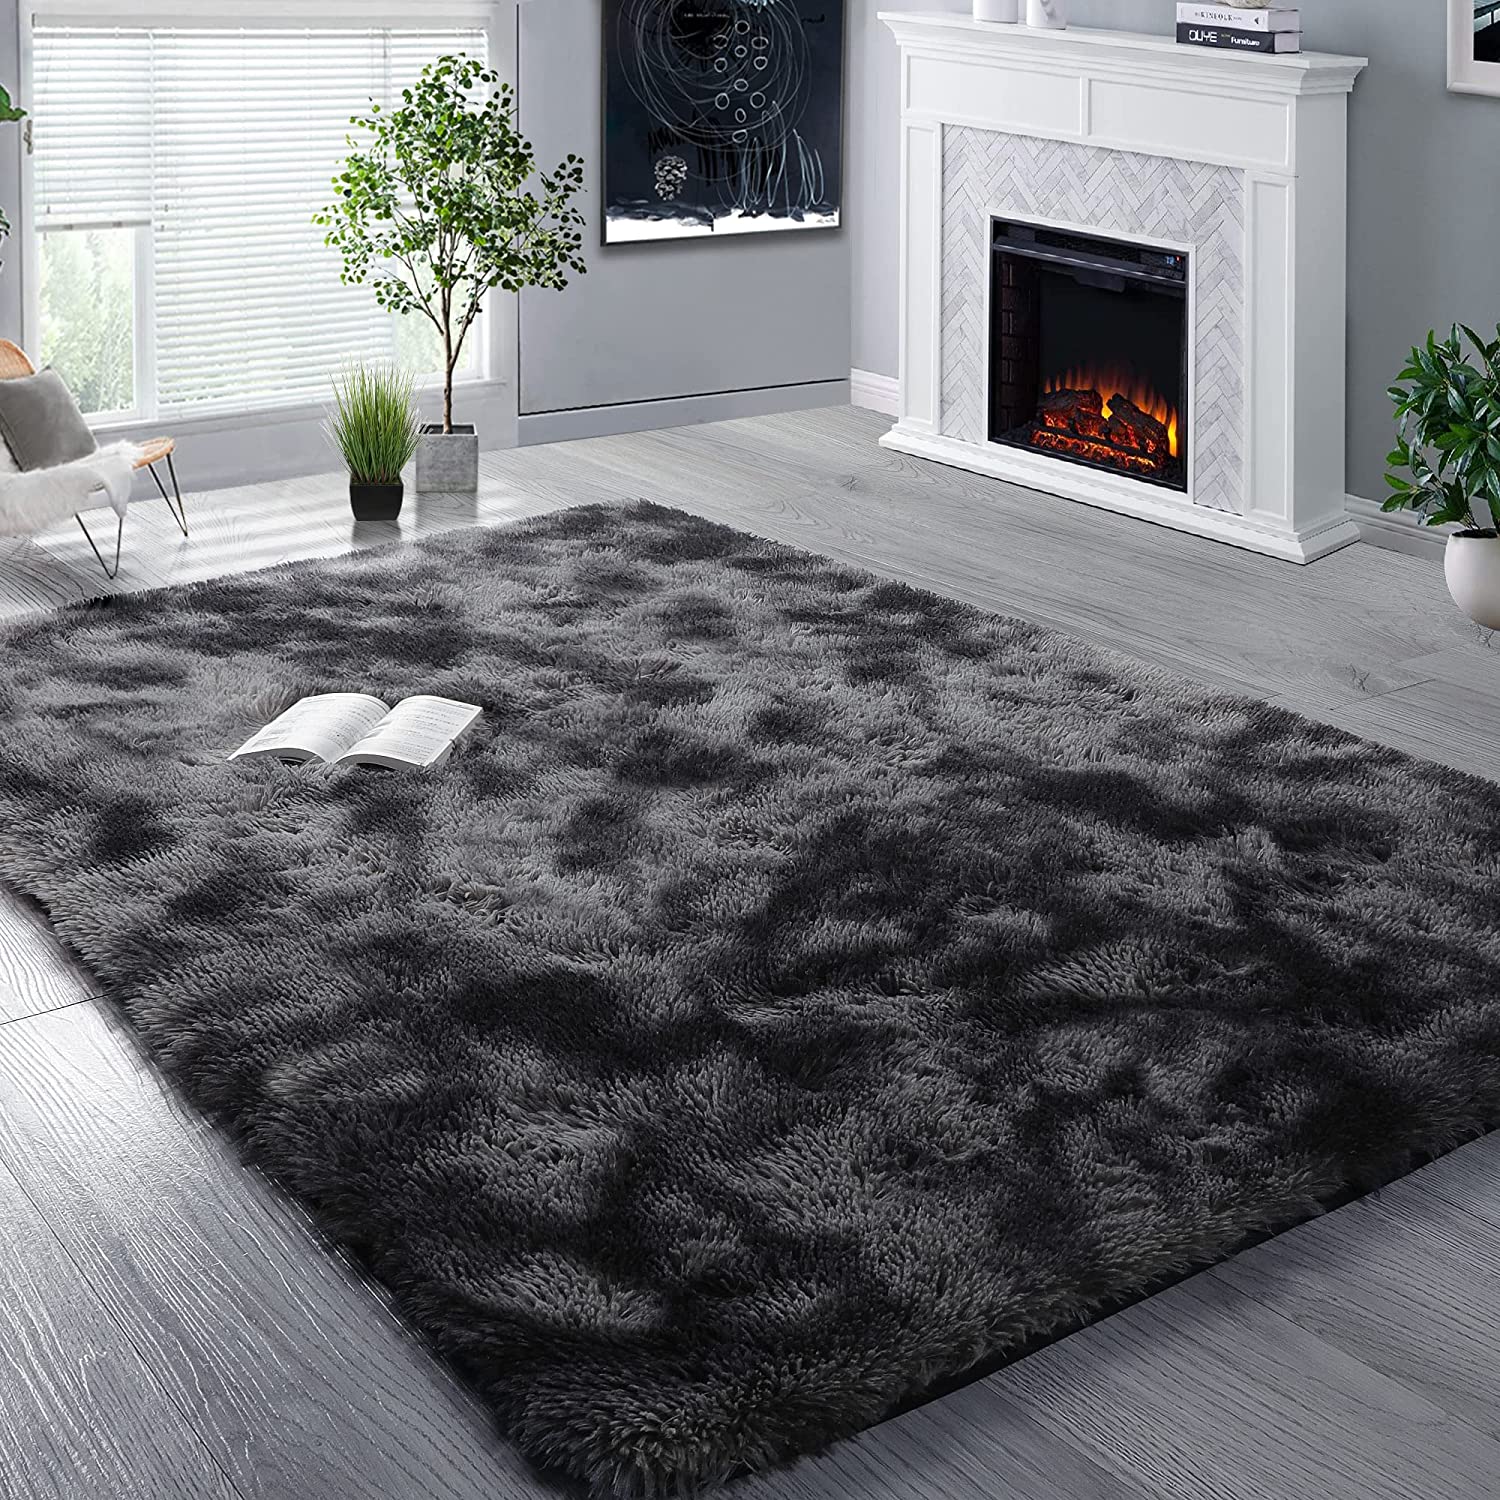  BSTLUV Soft Fuzzy Rugs for Living Room Bedroom,6x9 Ft